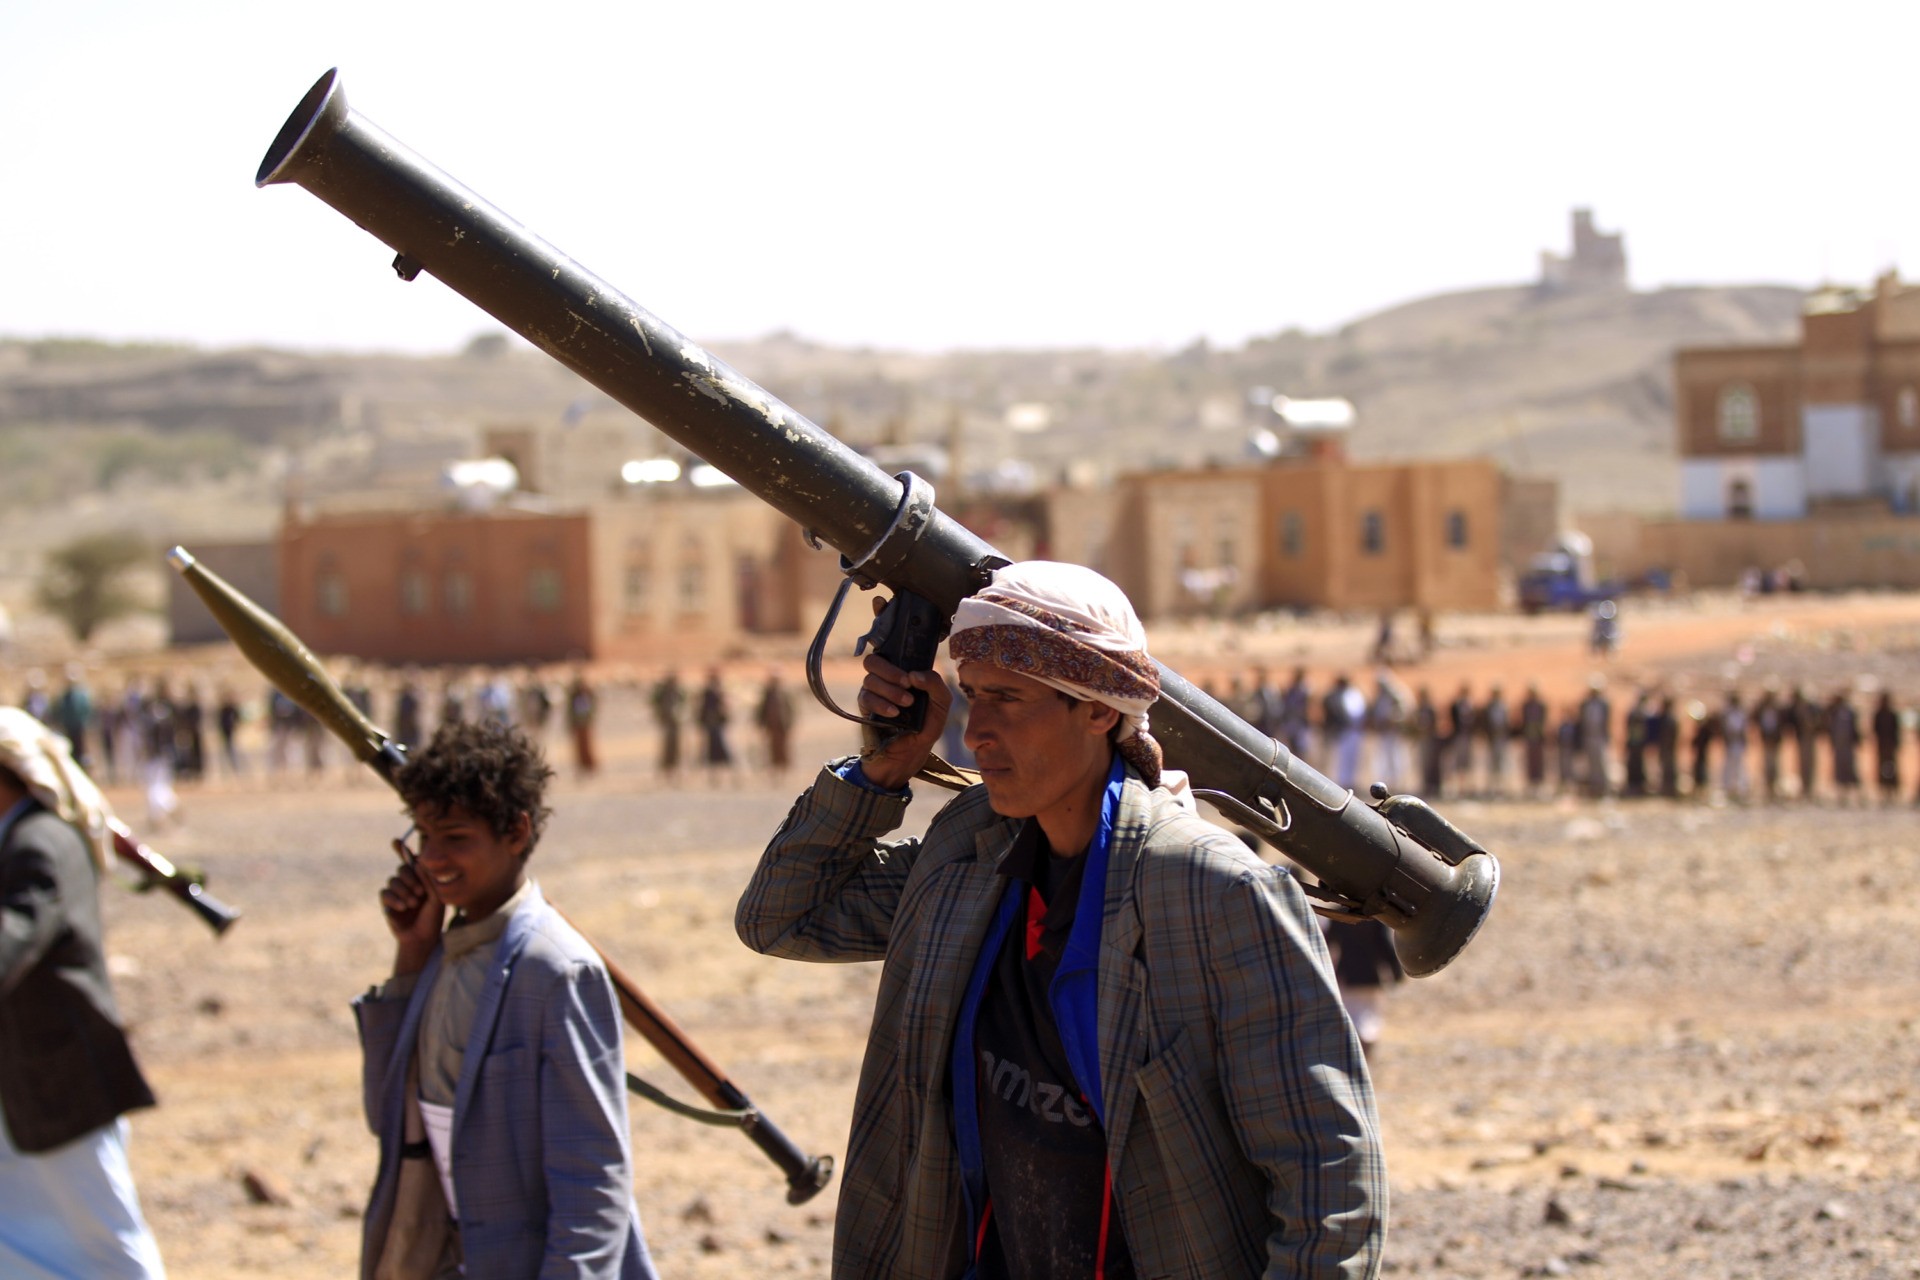 A Yemeni man carries a rocket launcher as he takes part in a gathering near the capital Sanaa to show support to the Shiite Huthi movement against the Saudi-led intervention on February 21, 2019. (Photo by Mohammed HUWAIS / AFP) (Photo credit should read MOHAMMED HUWAIS/AFP via Getty Images)